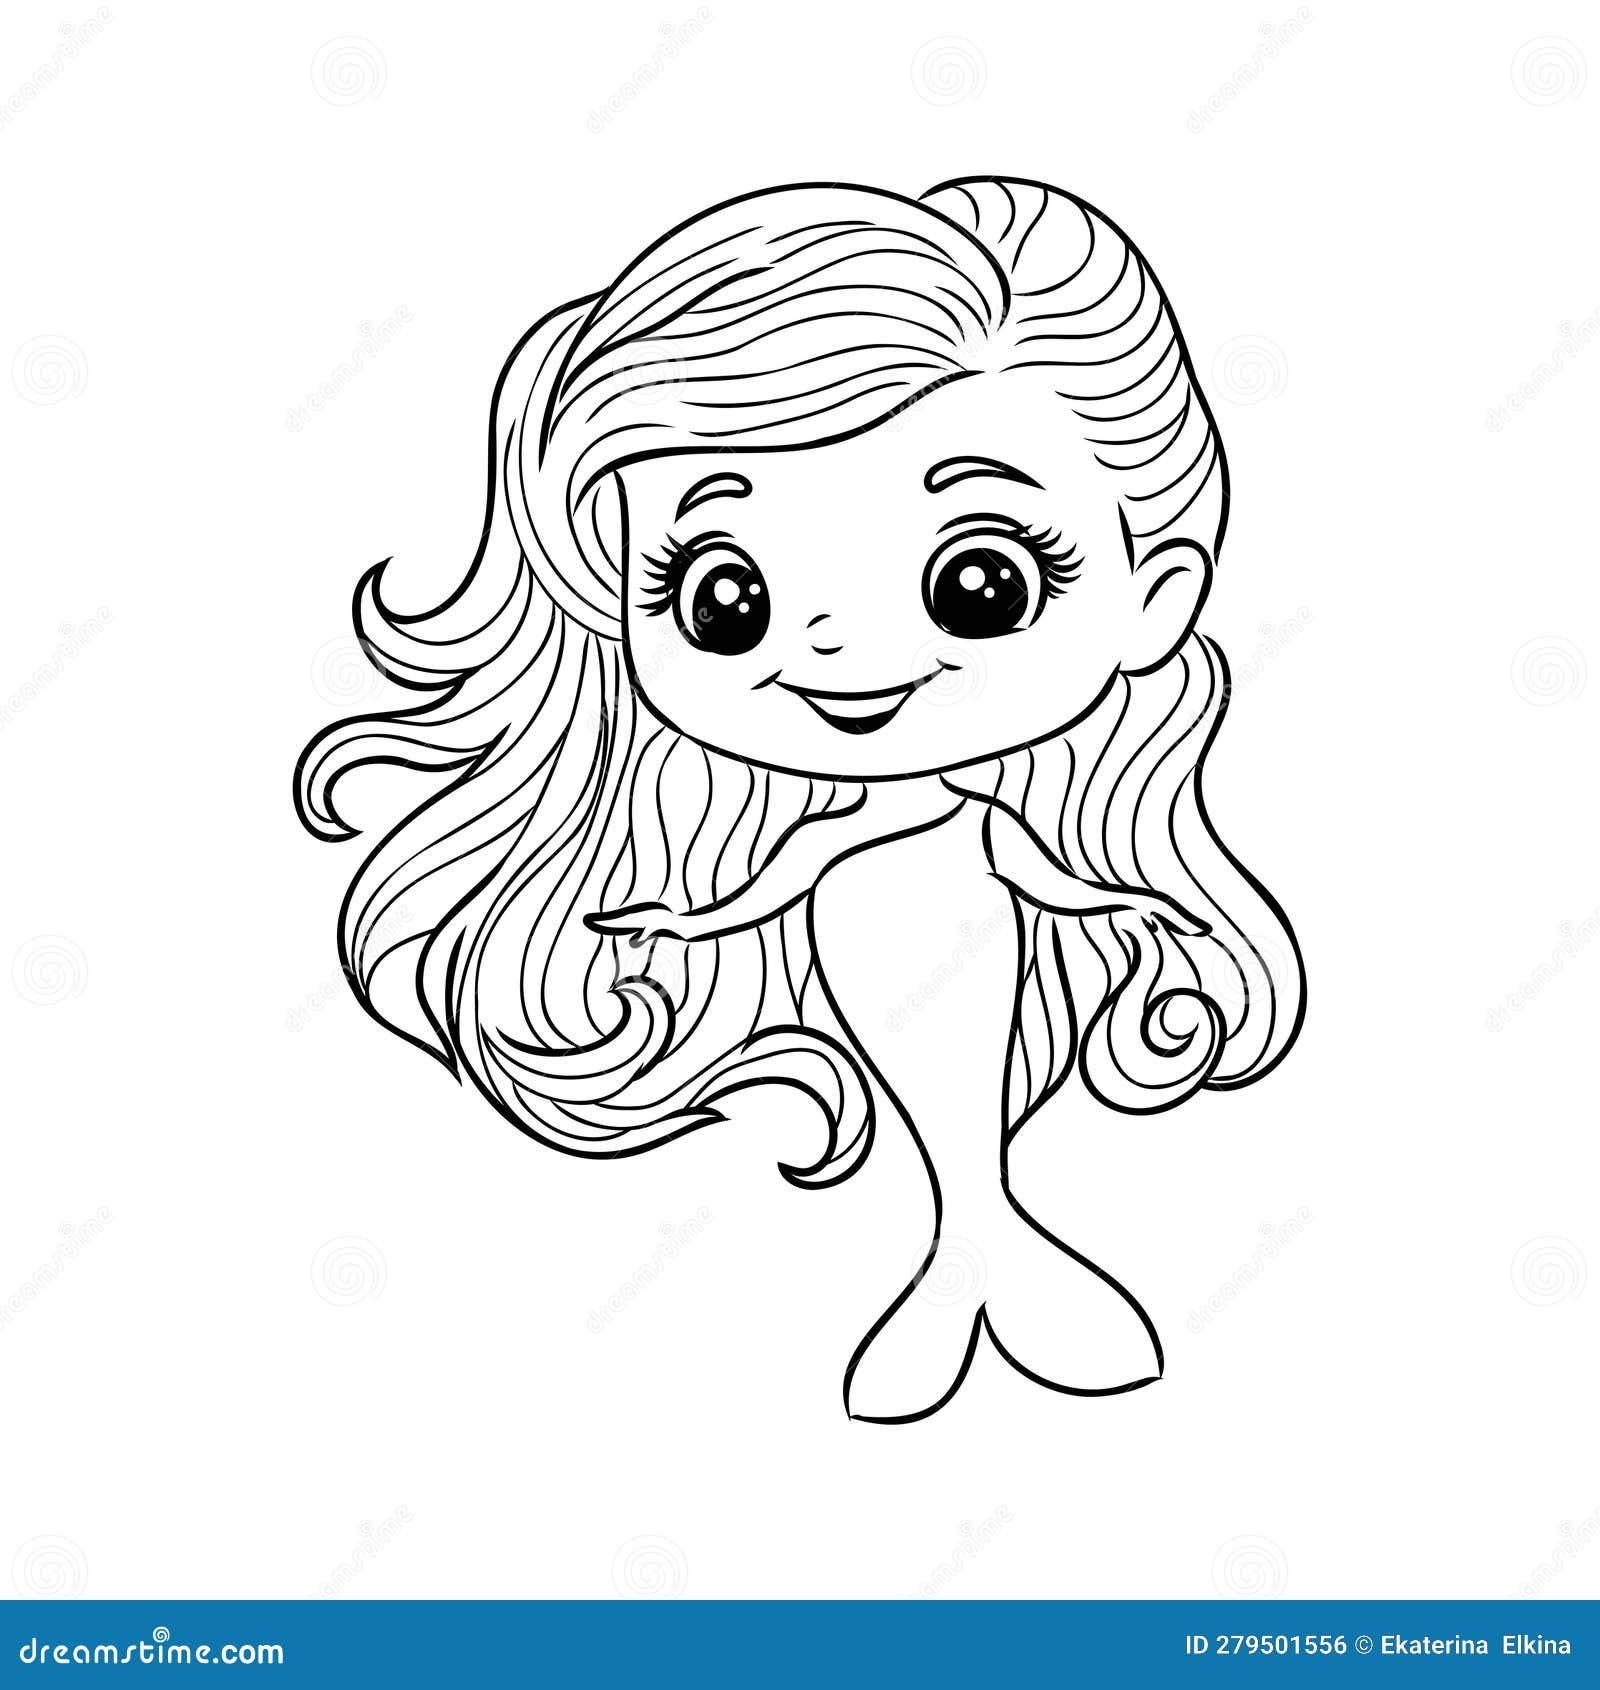 Little Mermaid Princess Vector Outline for Coloring Book Stock Vector ...